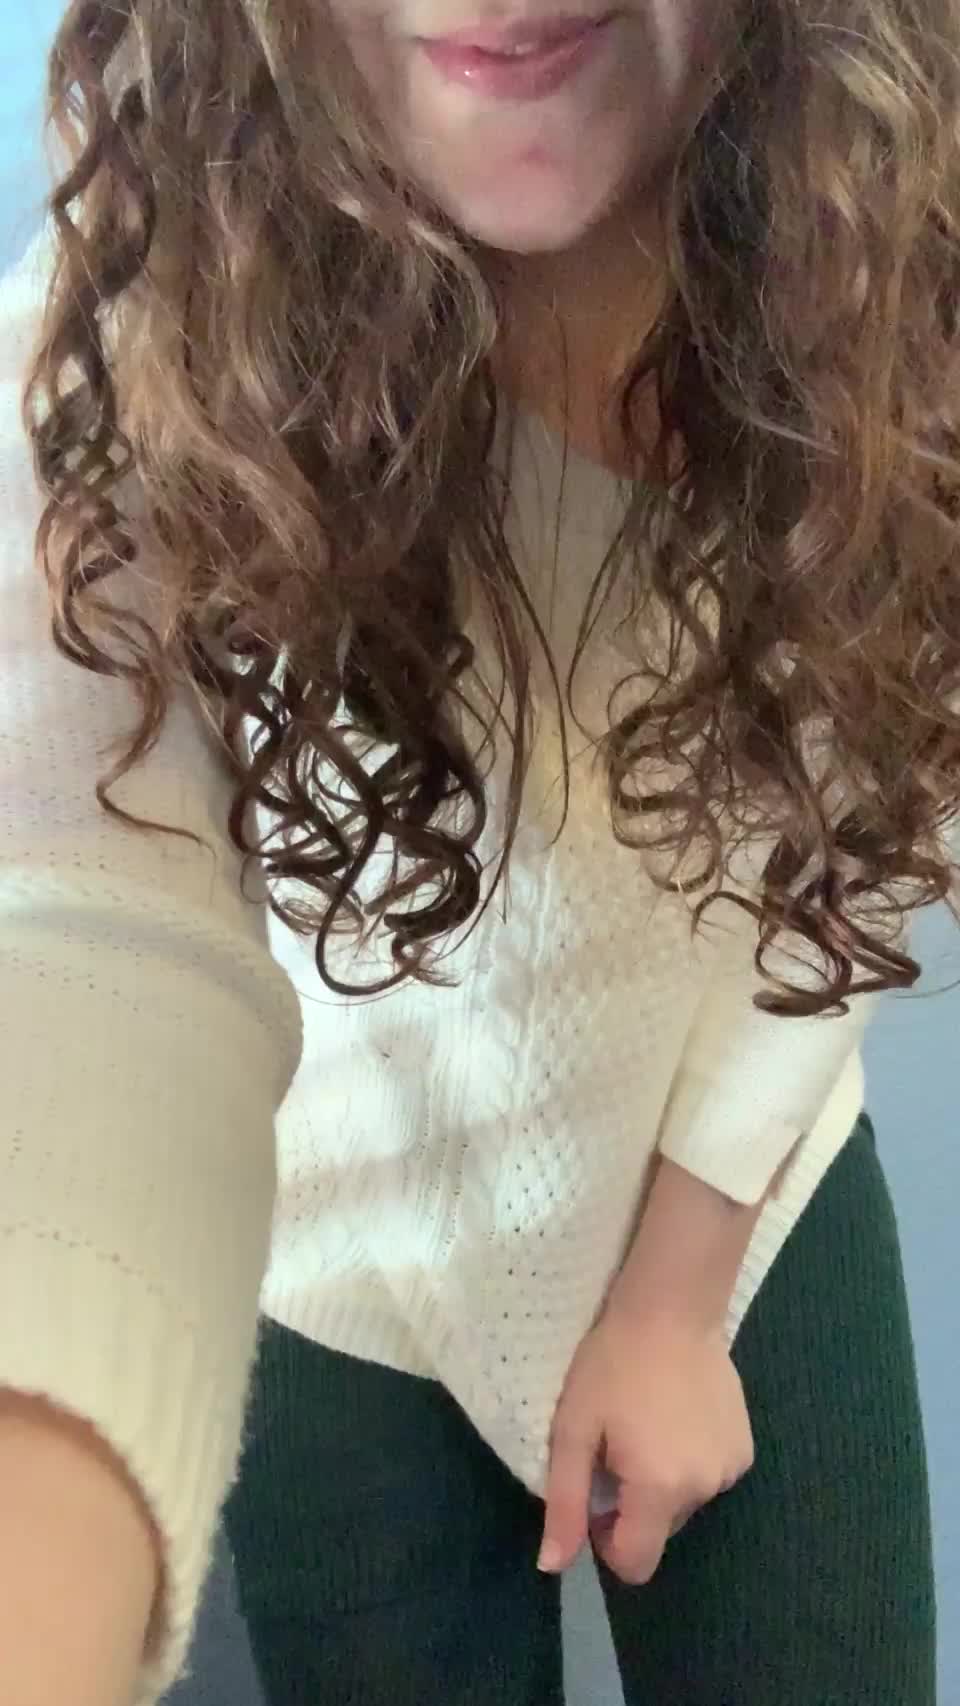 I wish sweater and thigh high season was year round : video clip